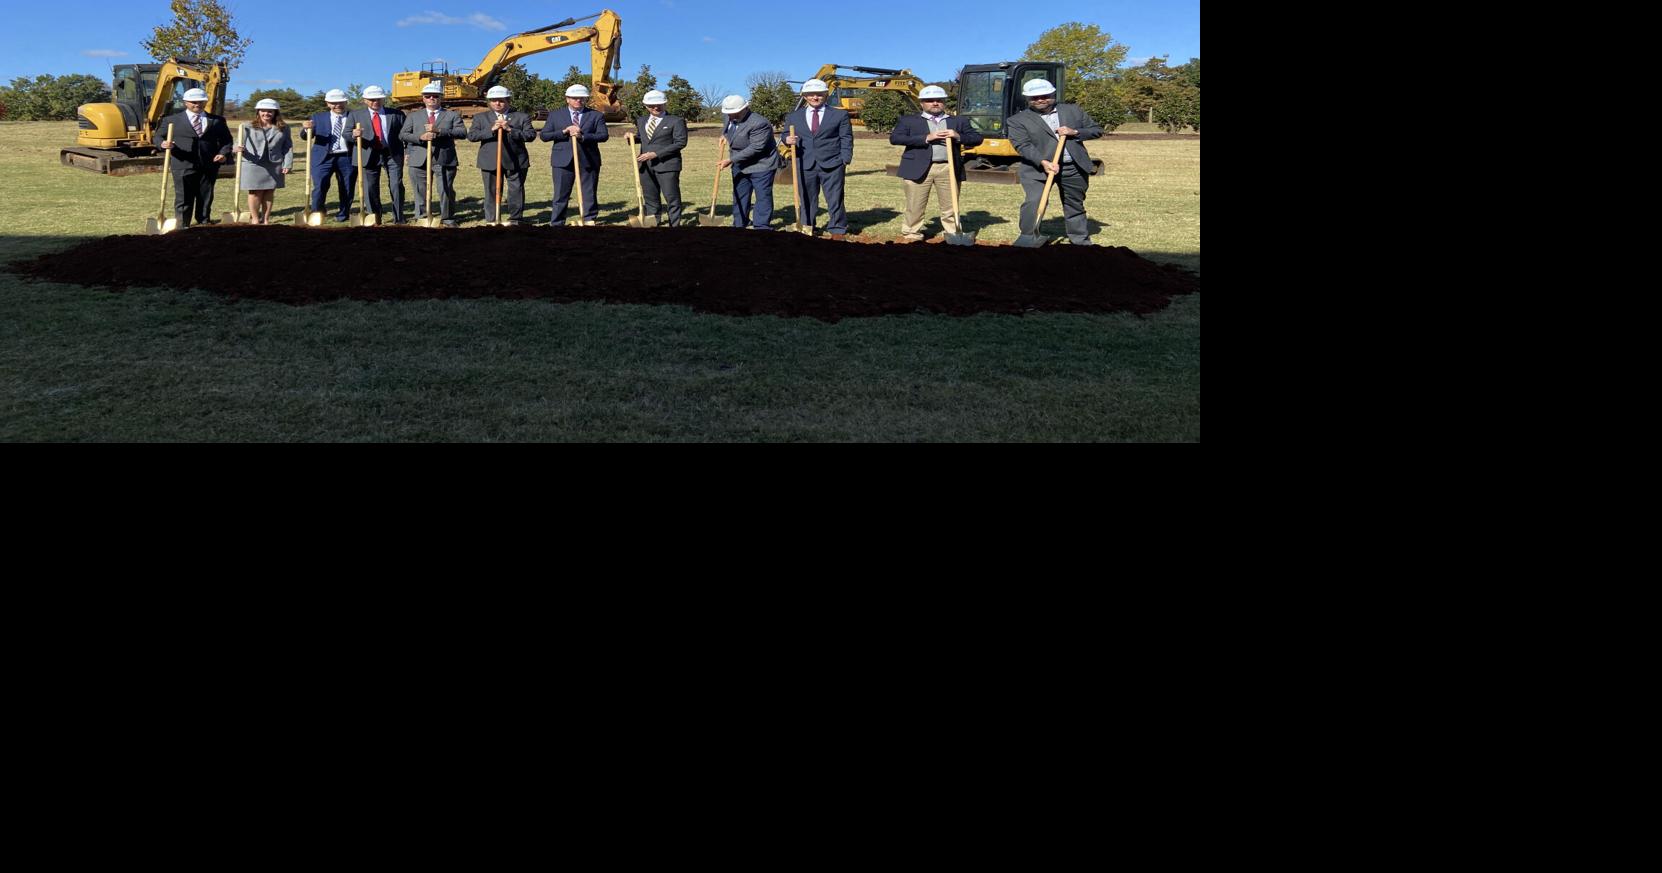 Radiance Technologies breaks ground on second building in Cummings Research Park